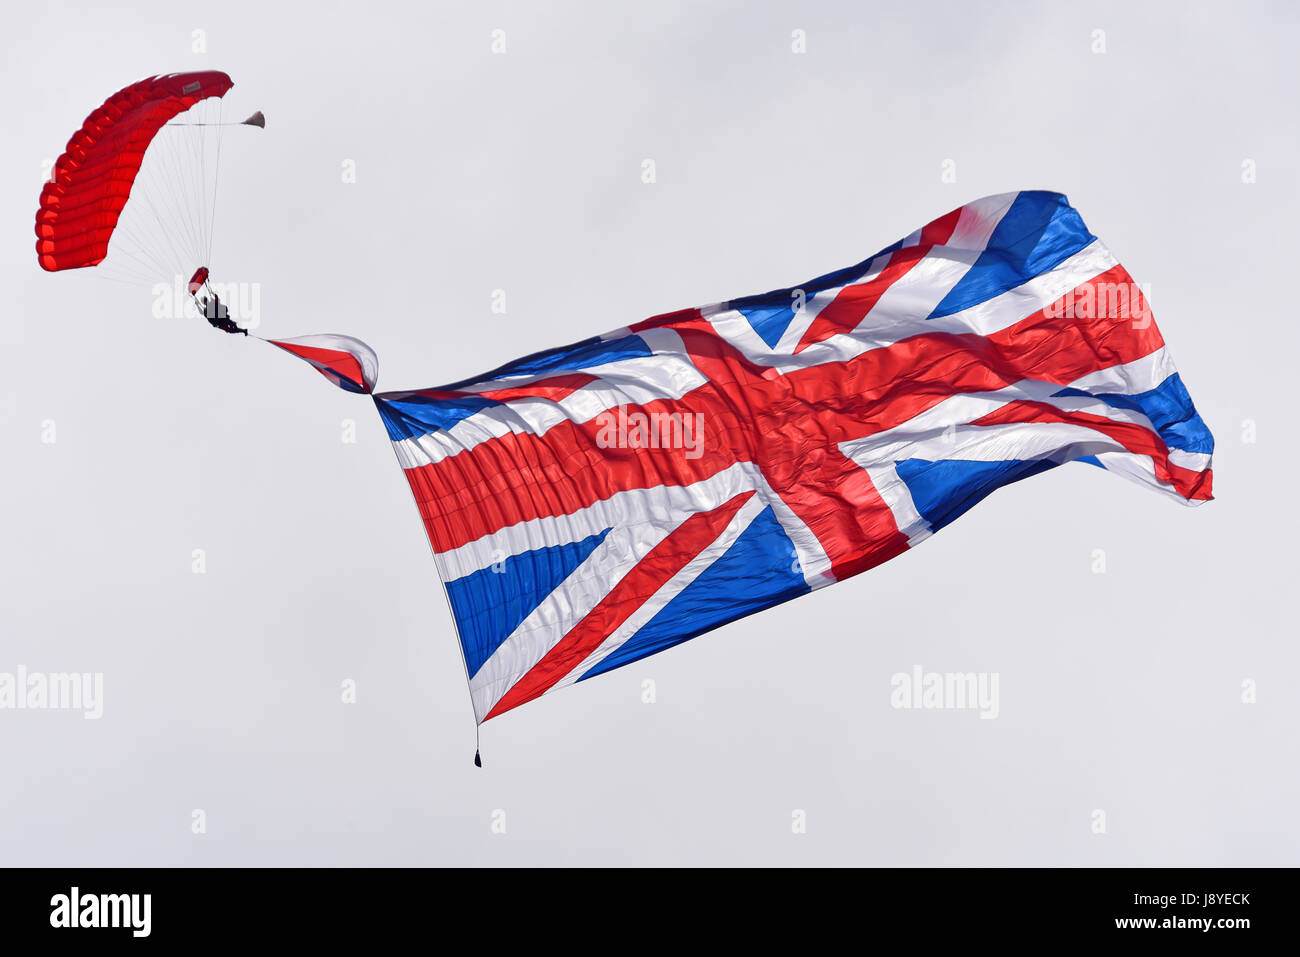 The Red Devils parachute team with the largest flag used by any team, here using the 5000 sq ft union flag Stock Photo